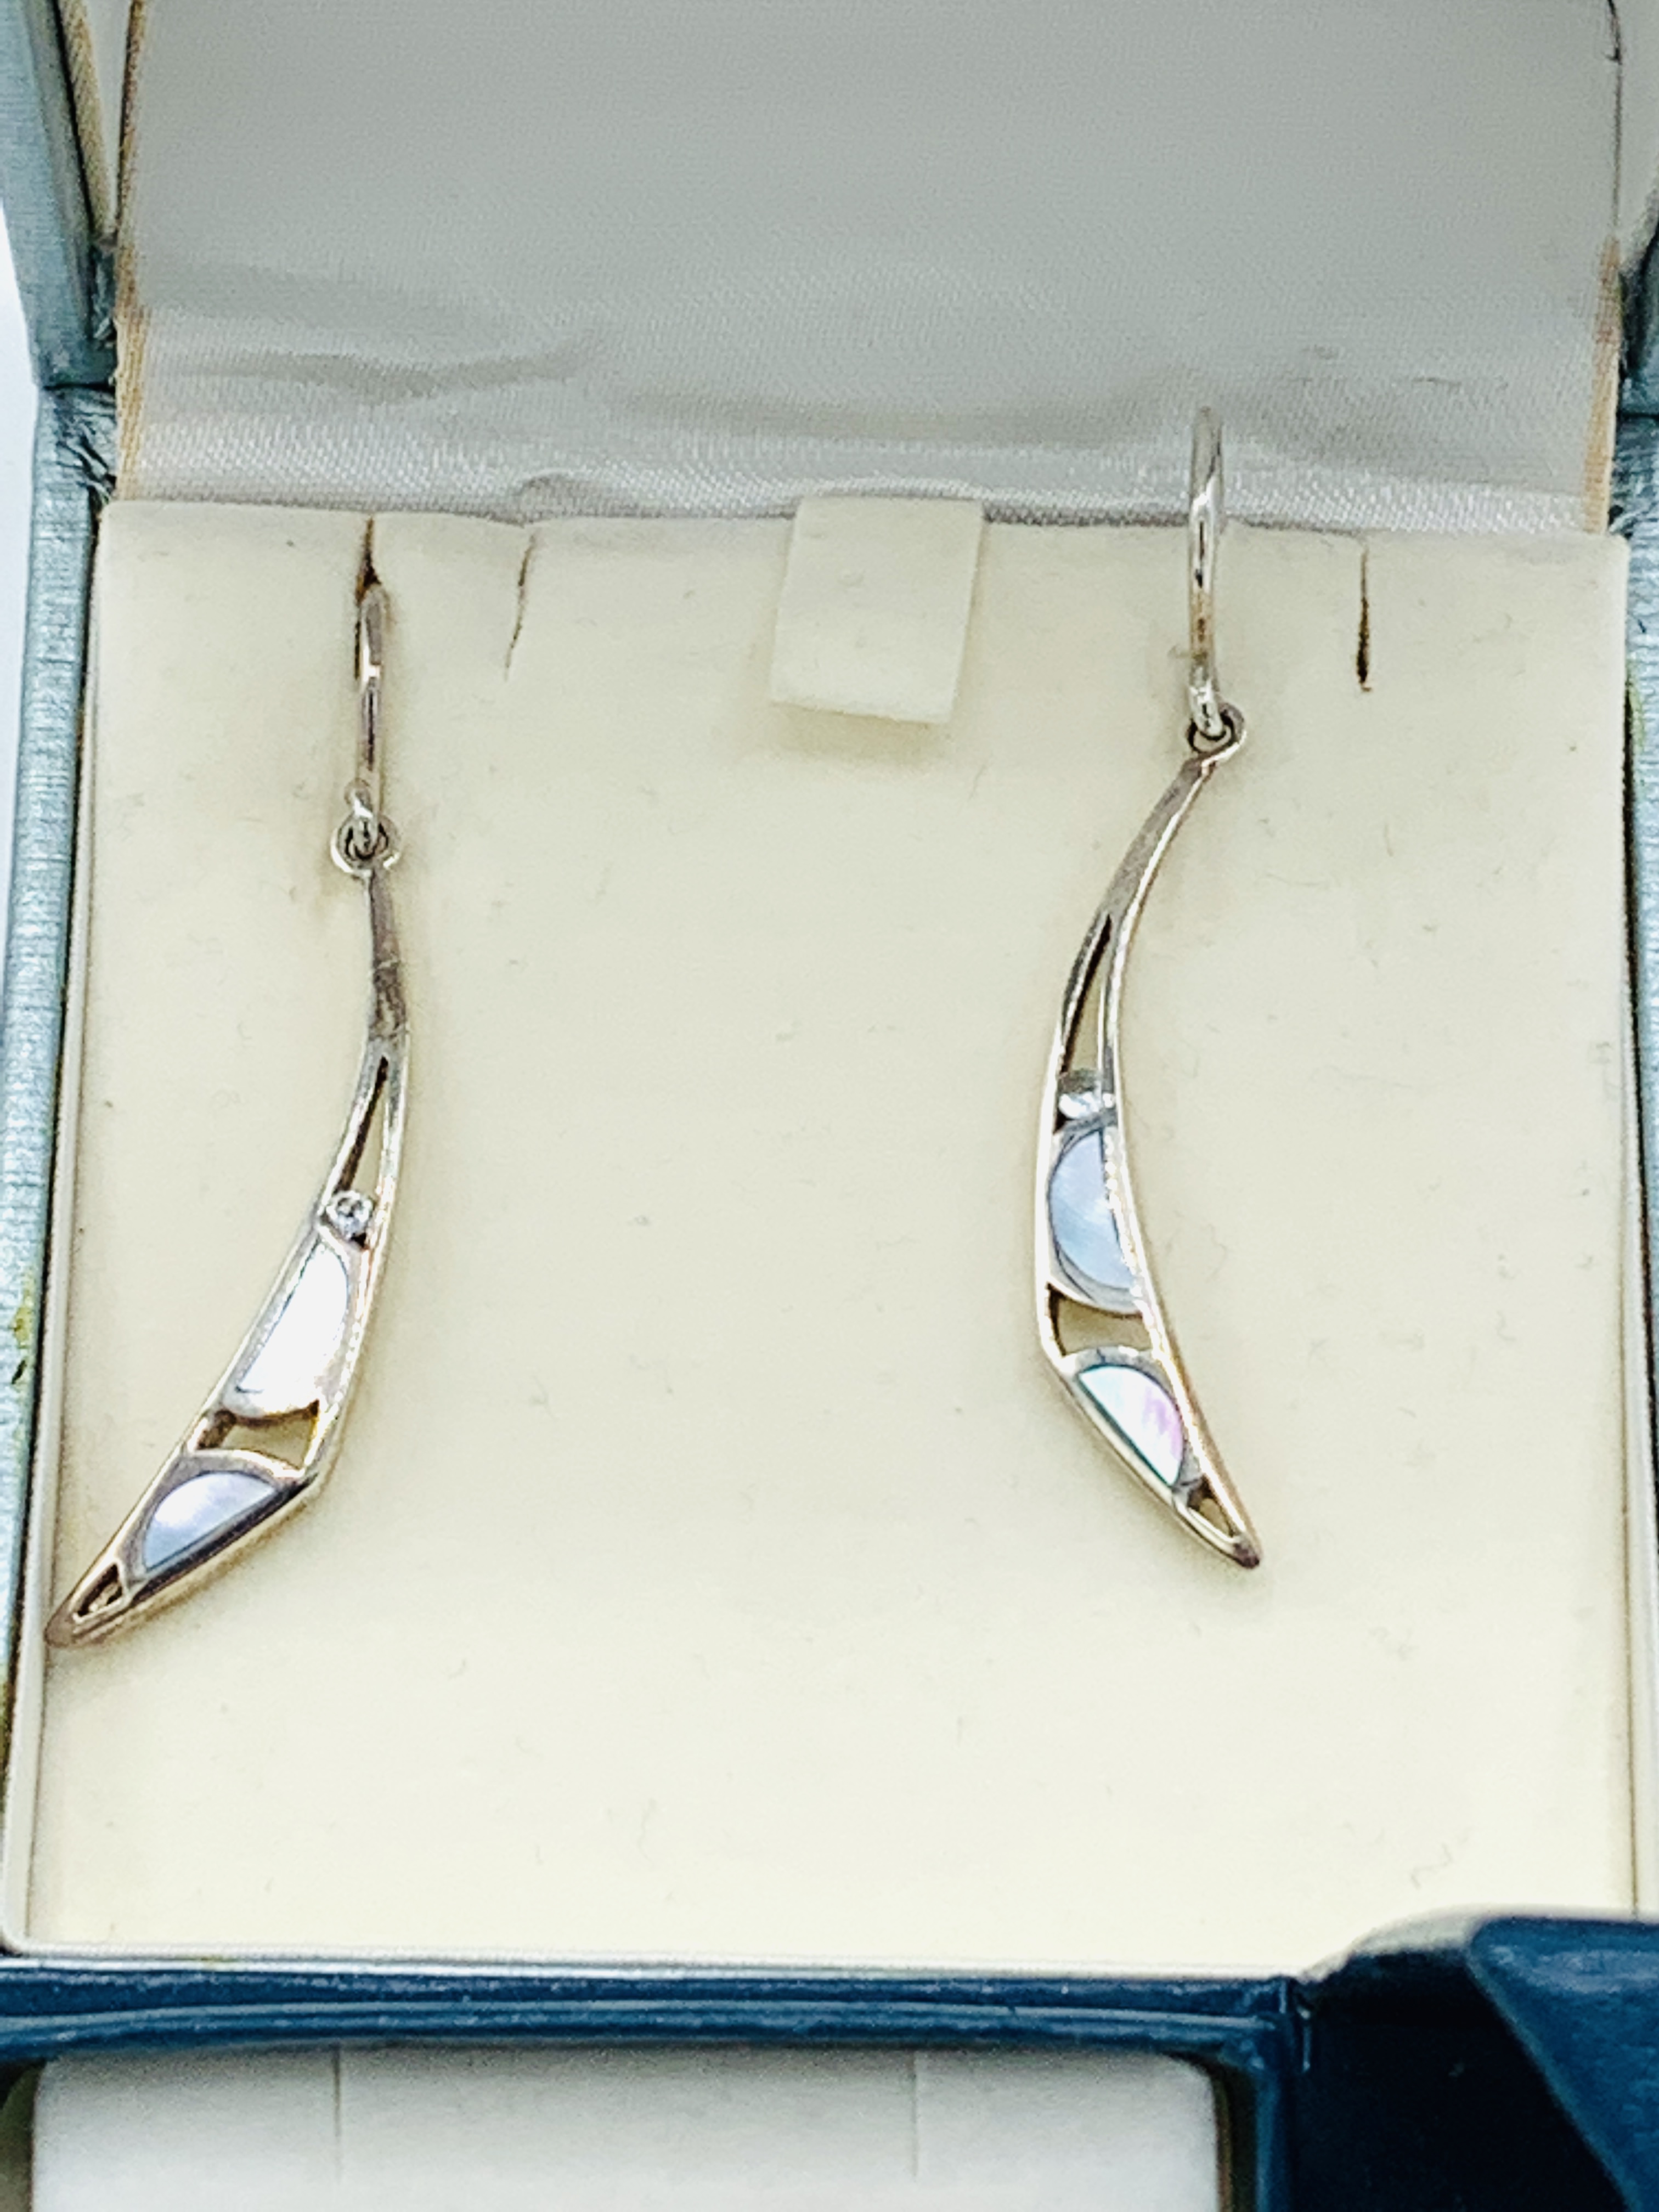 925 silver drop earrings together with two pairs of stud earrings. - Image 2 of 3